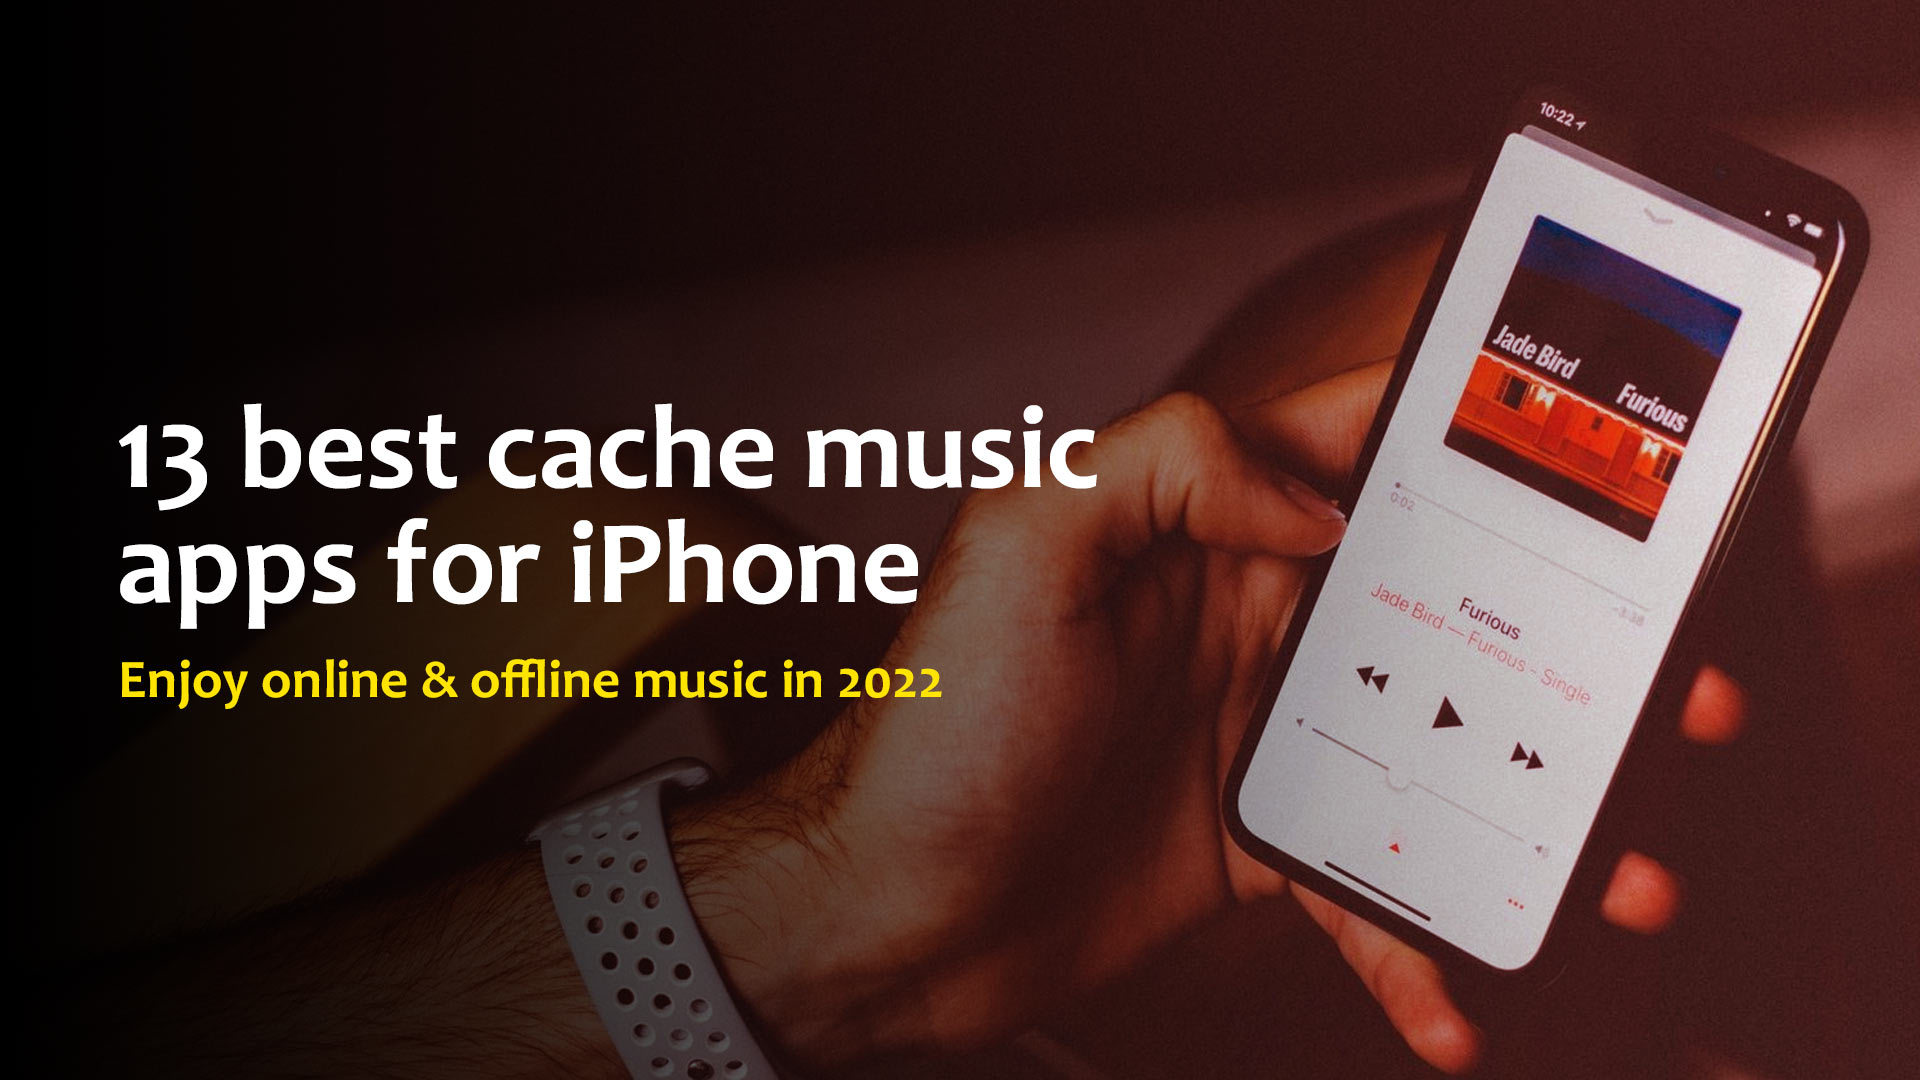 13 best cache music apps for iPhone to listen to music online and offline in 2022